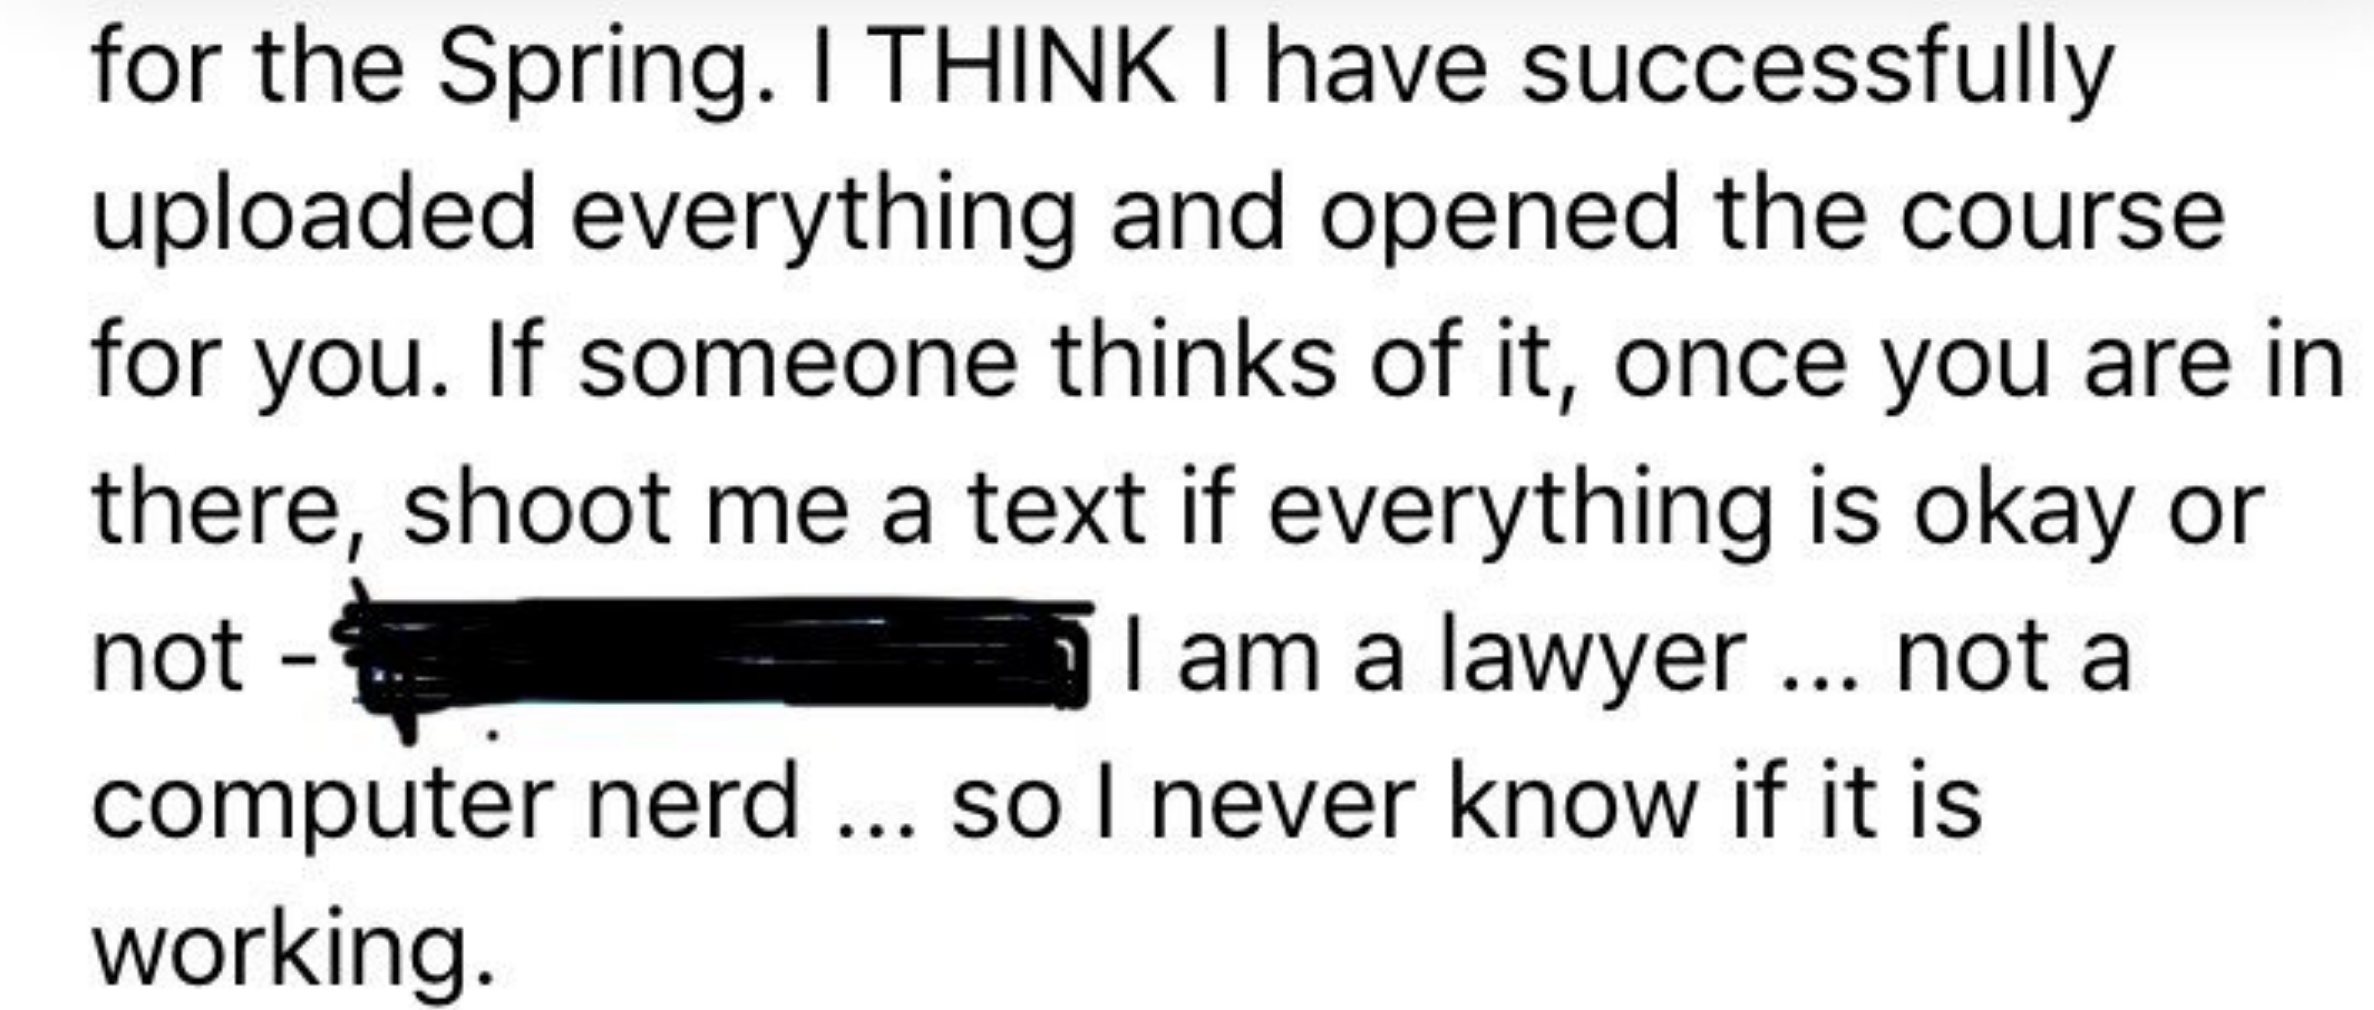 &quot;I am a lawyer ... not a computer nerd ... so I never know if it is working.&quot;